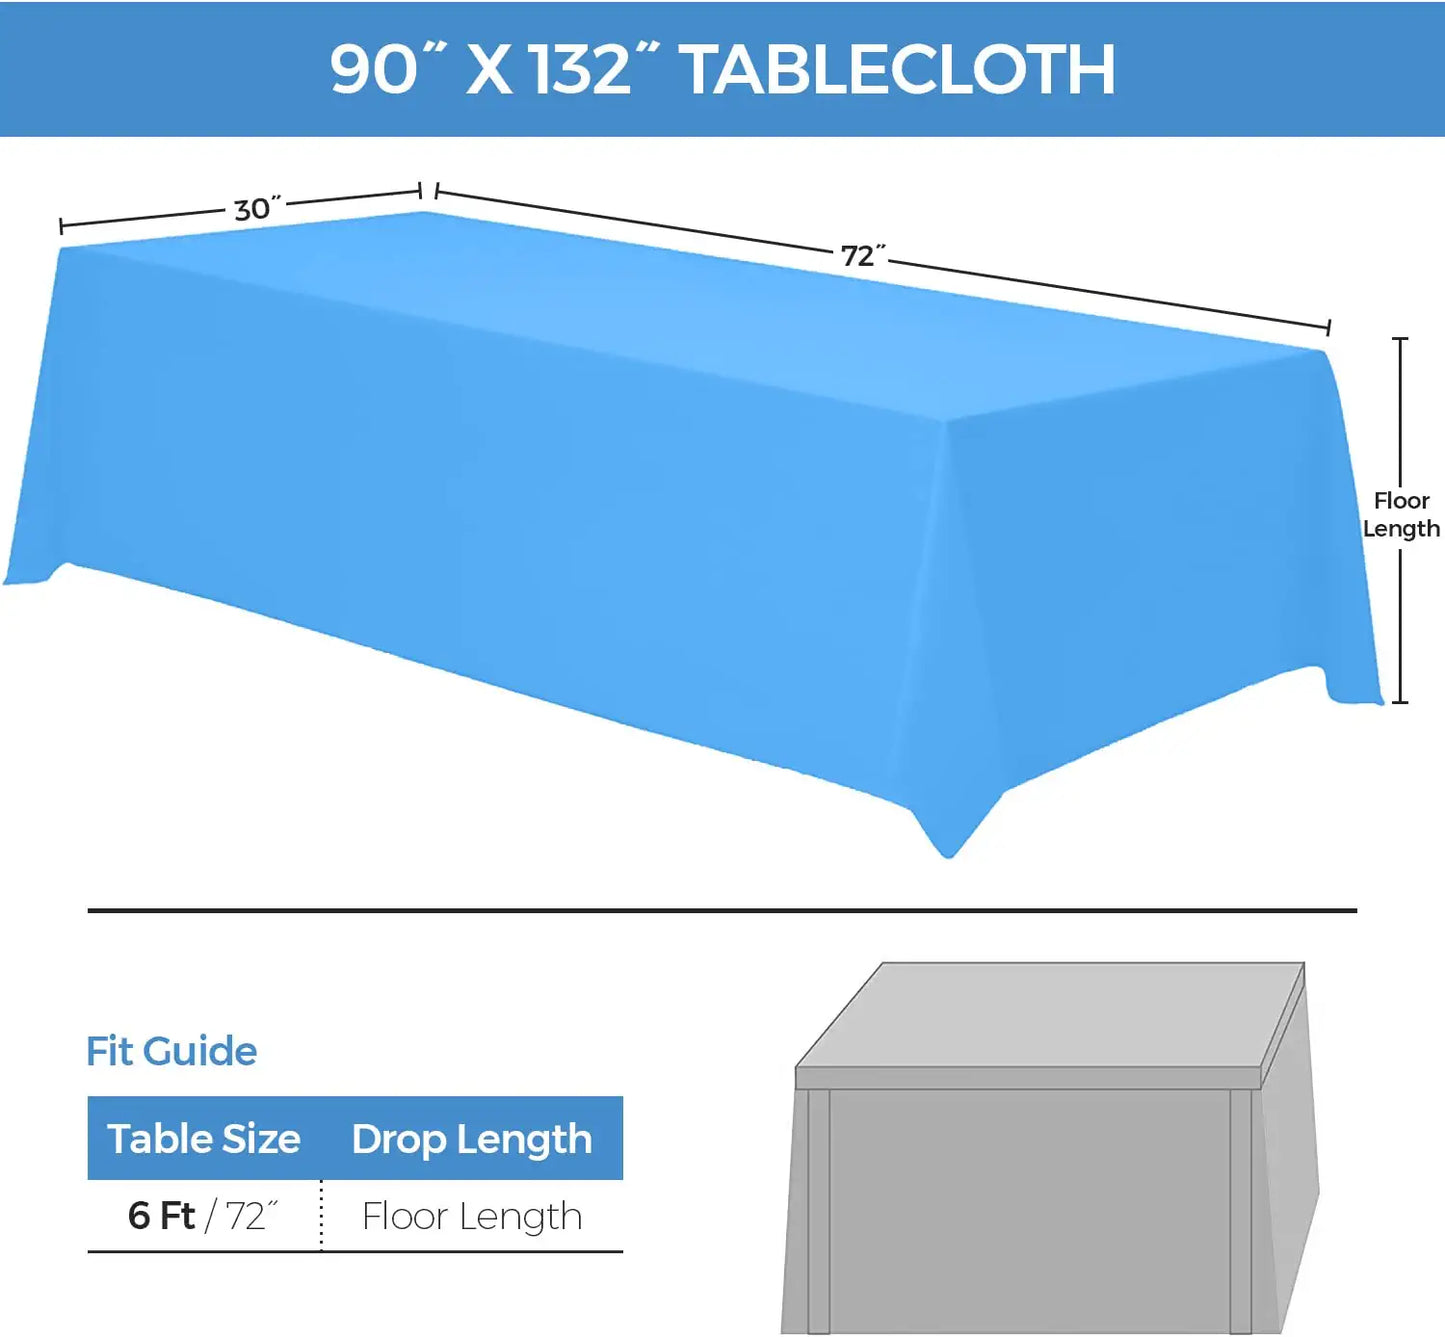 6 Ft white table cloths